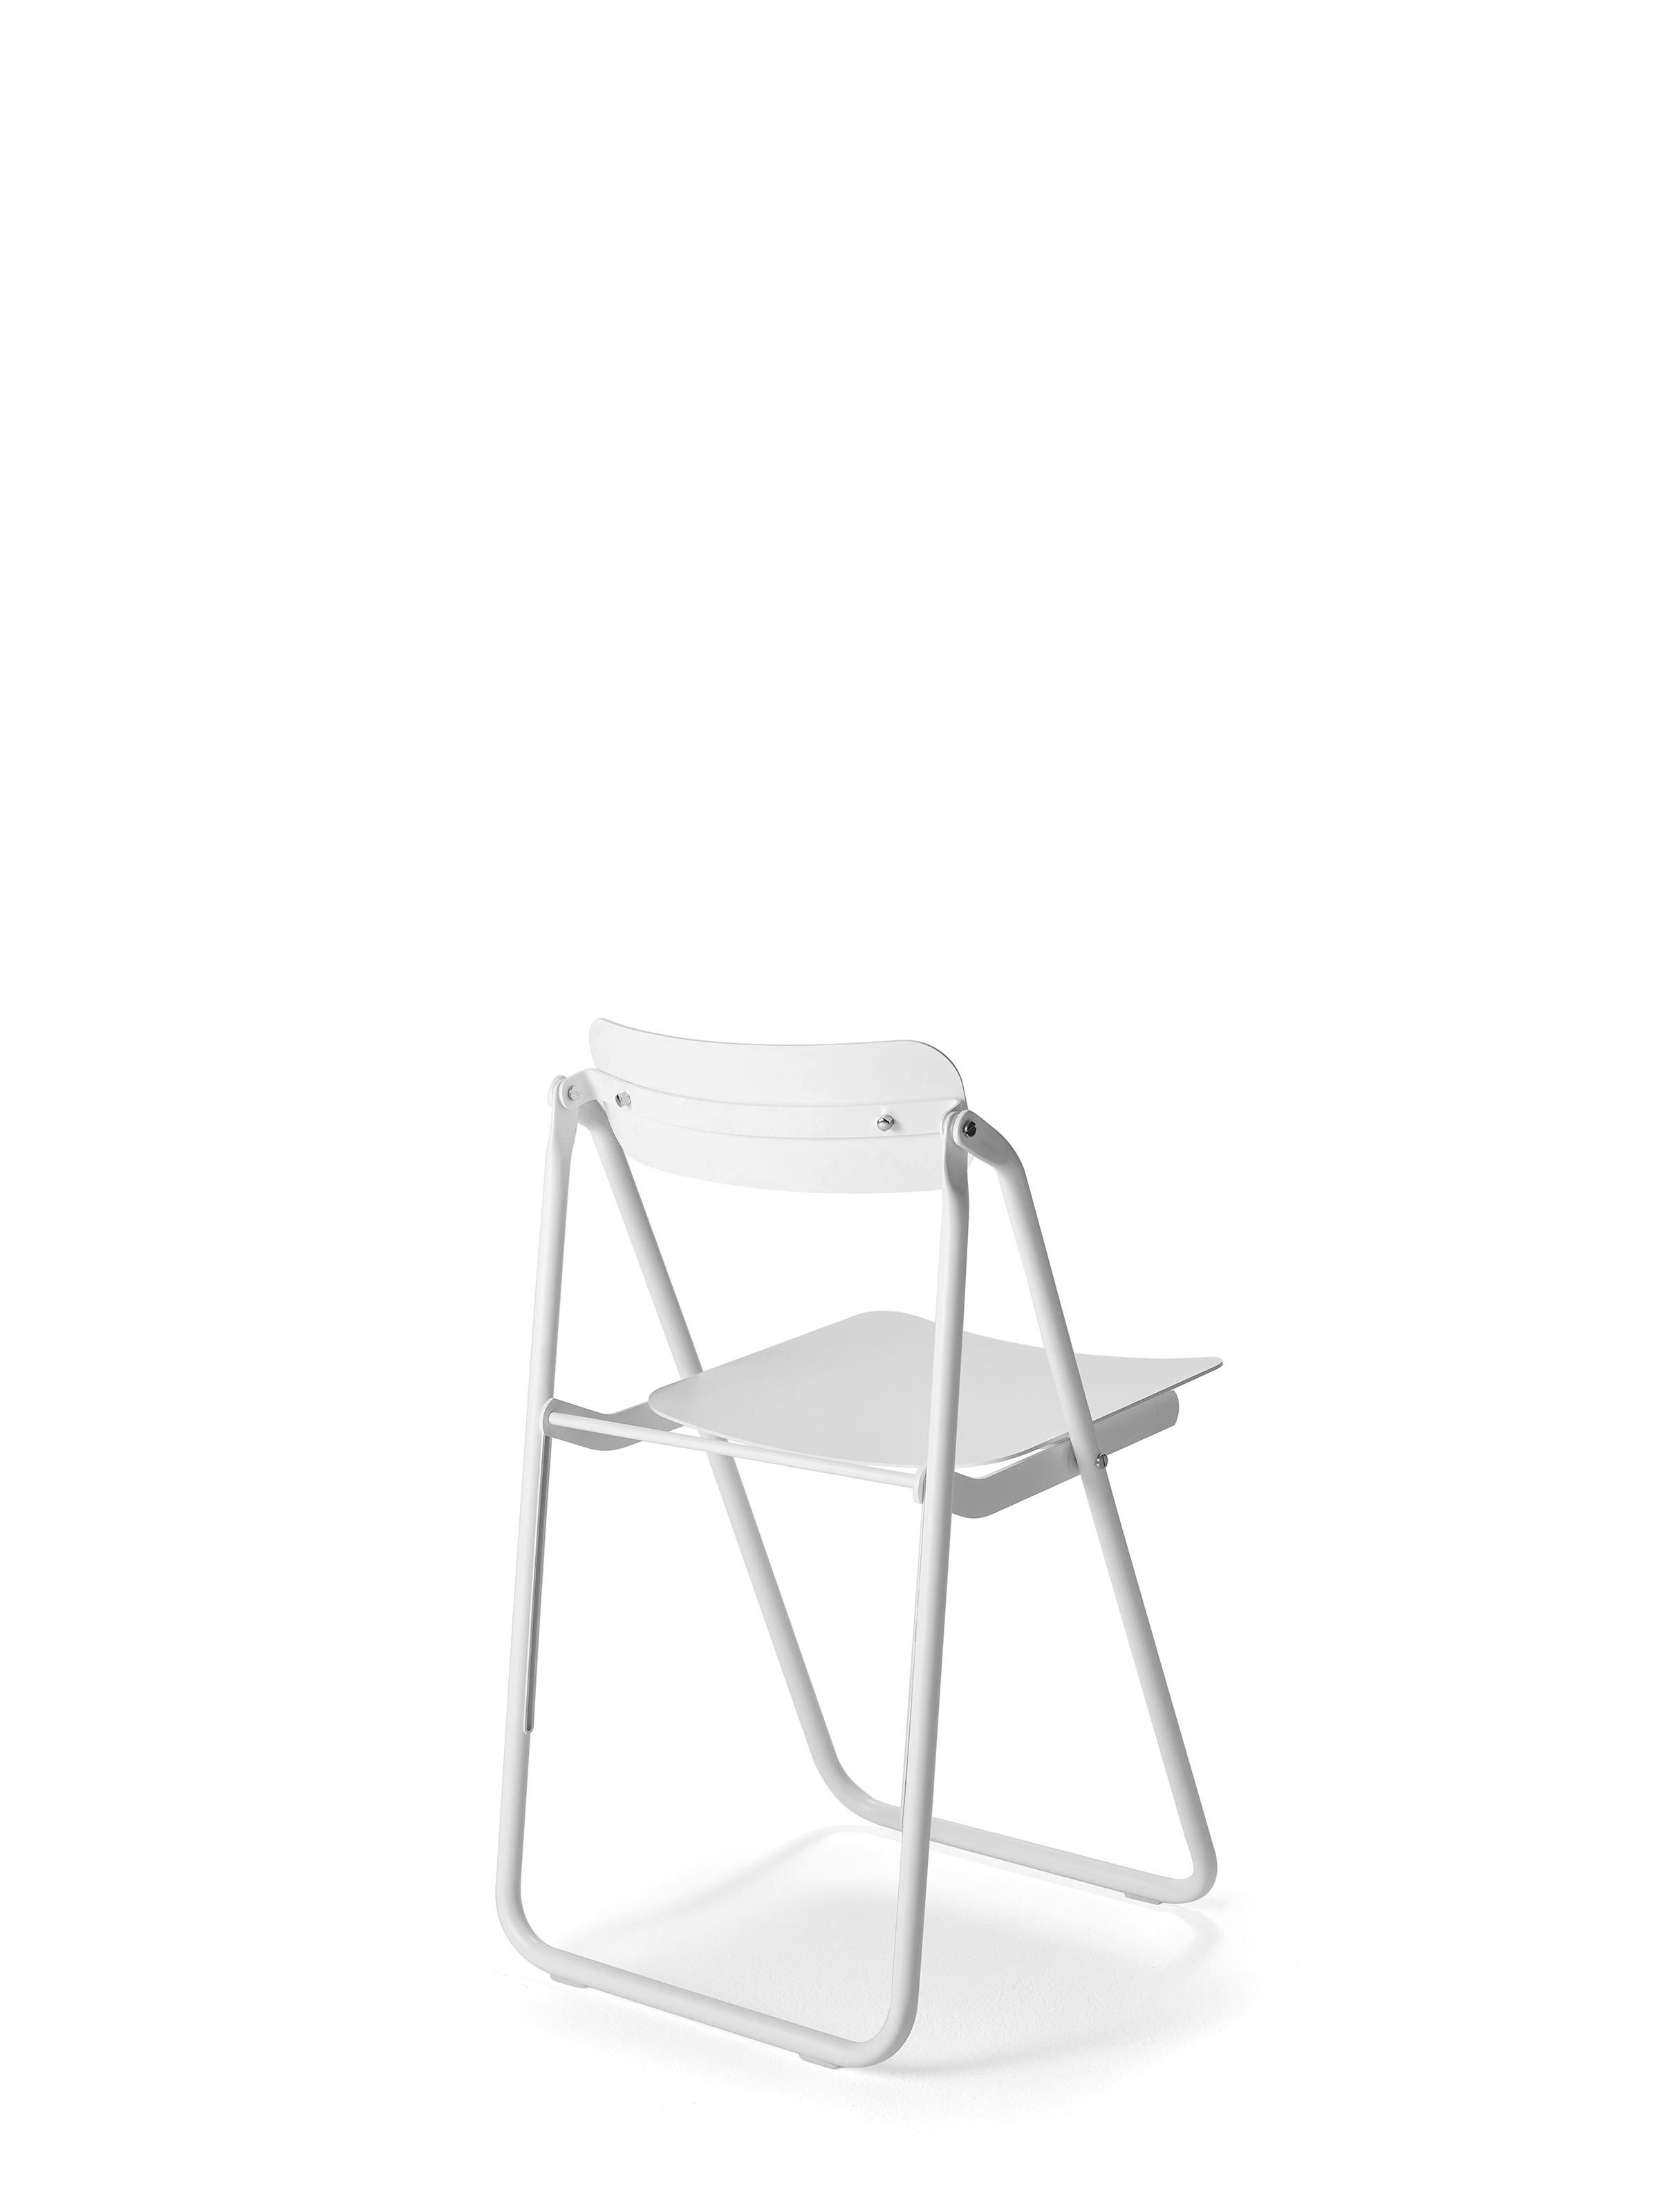 For Sale: White Opinion Ciatti Con Fort Set of 2 Steel Folding Chairs